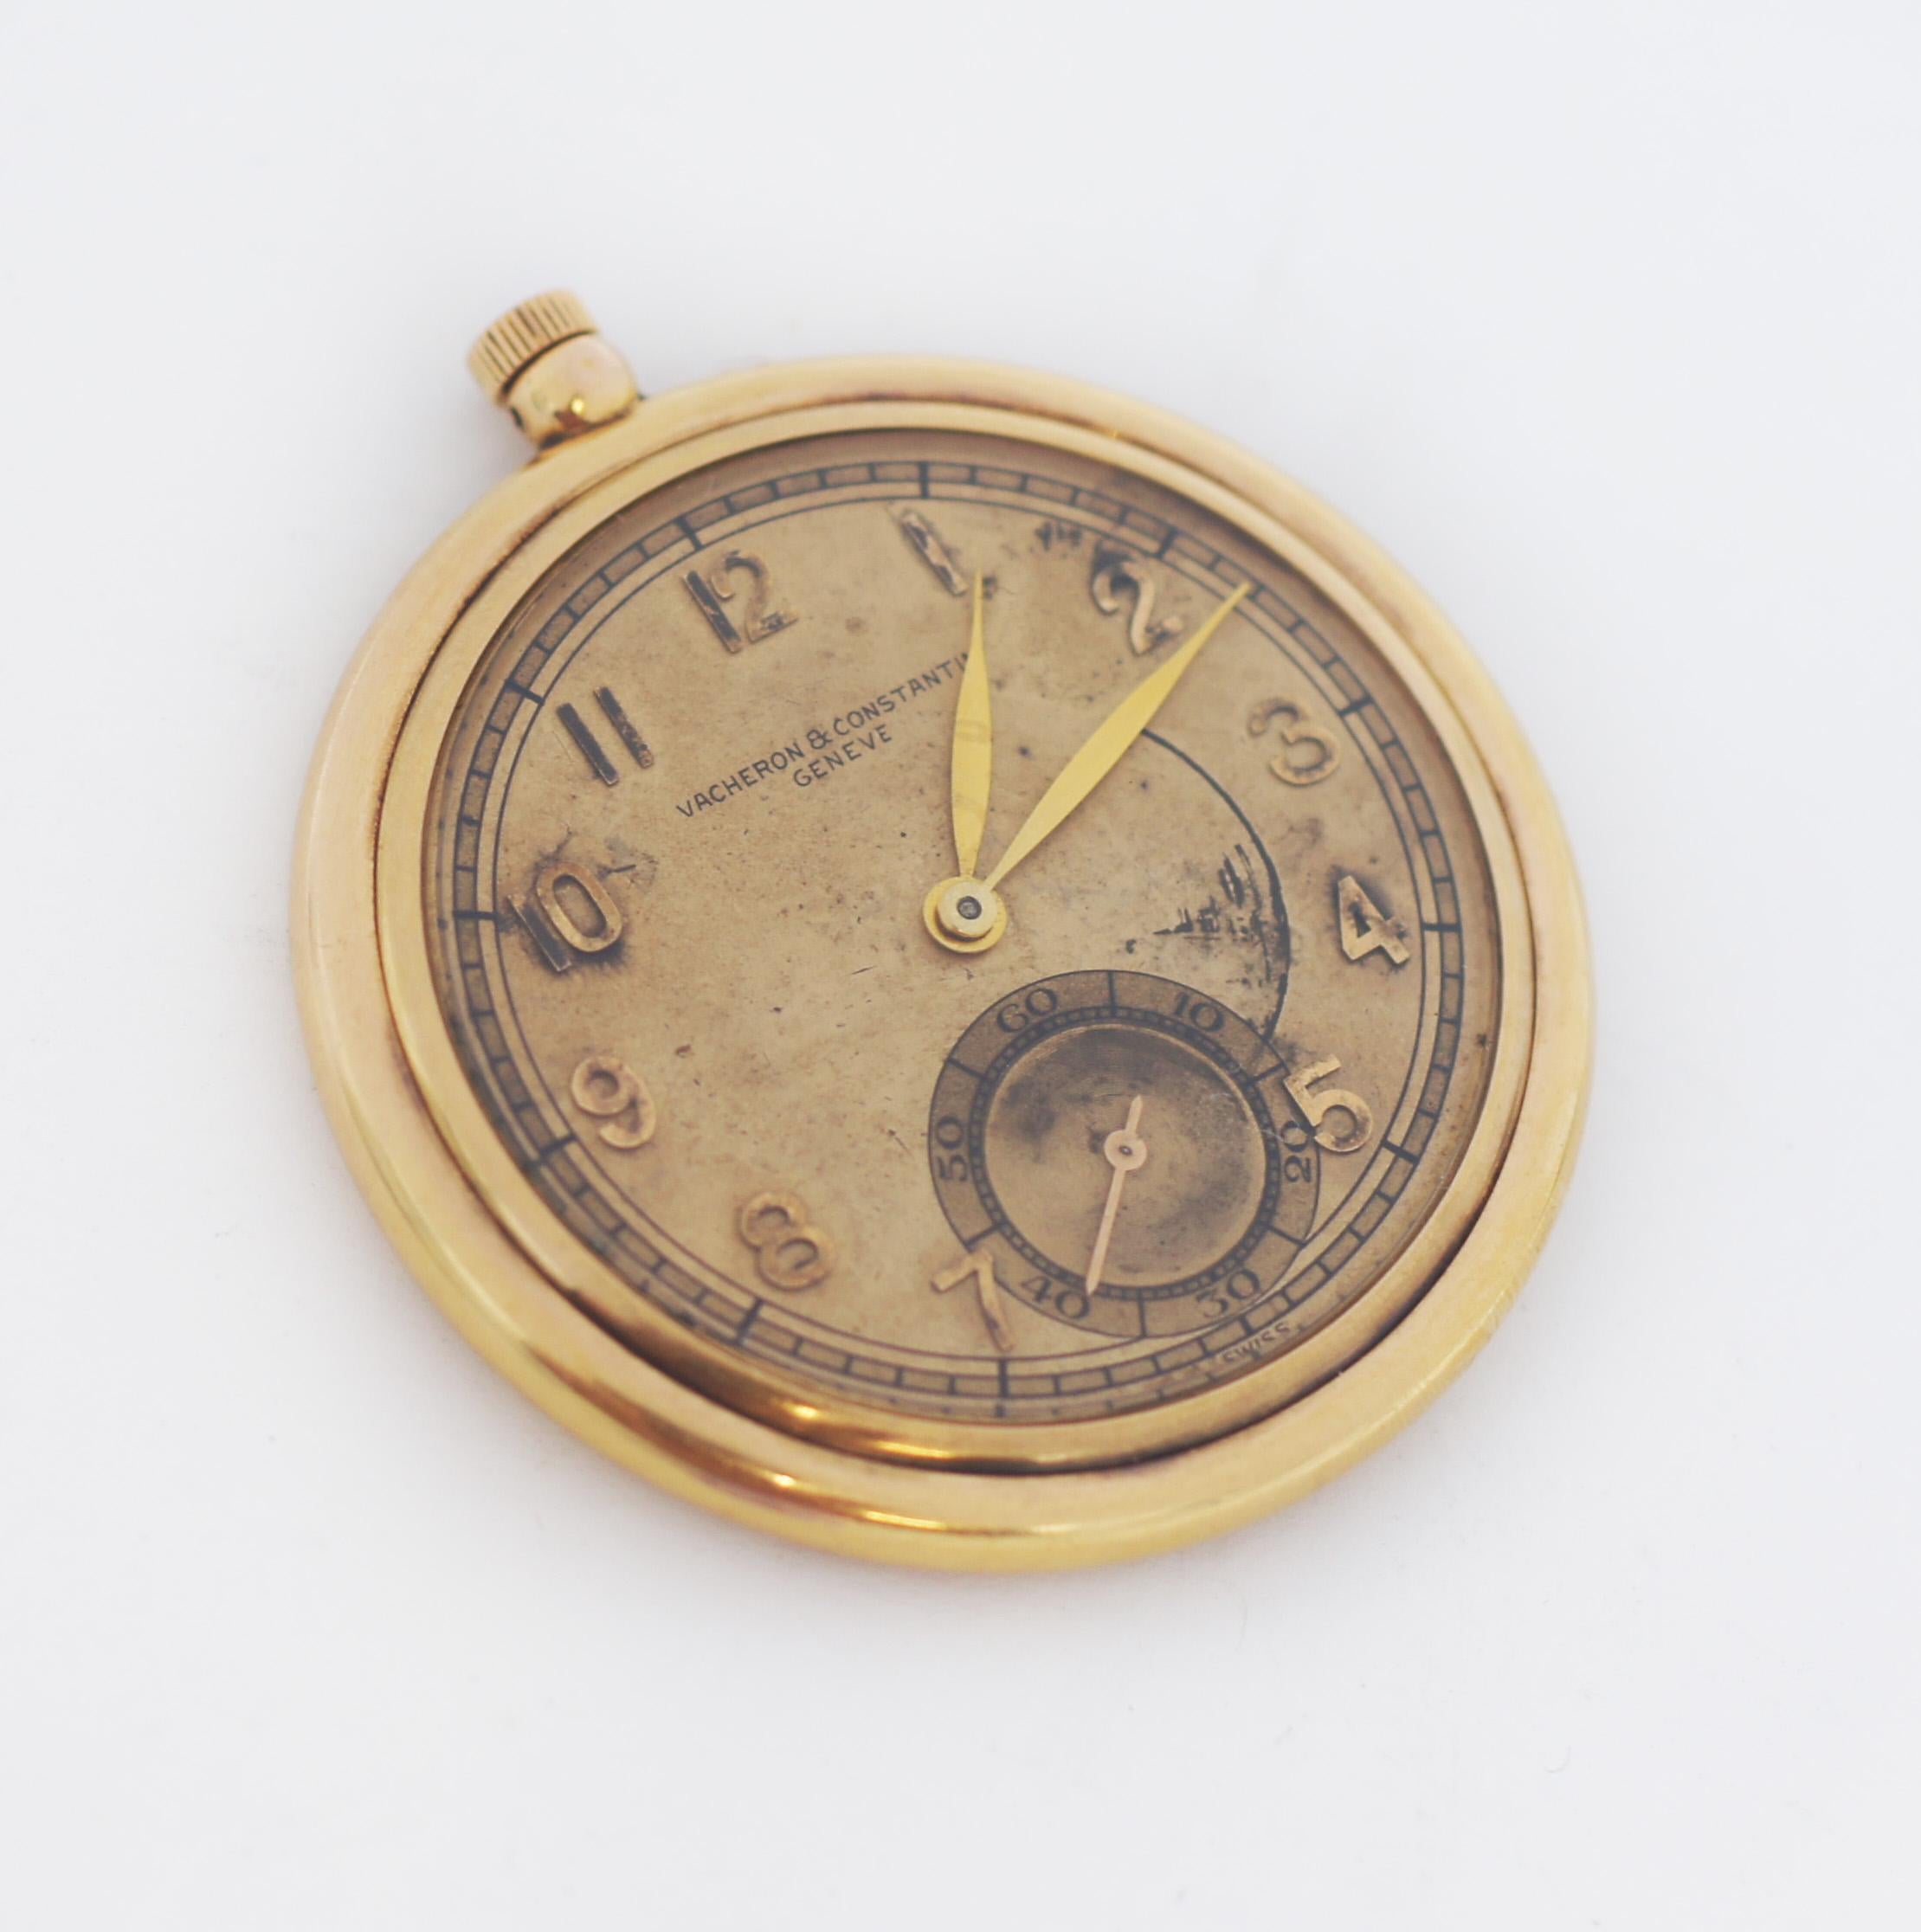 Vacheron Constantin Antique pocket watch 
Geneve
18 K Gold casing 
open face 
Dial is champagne/cream dial which has been toned and darken over time  
features Arabic gold numerals with sub-dial for seconds 
Gold hour and minute hands
Windup